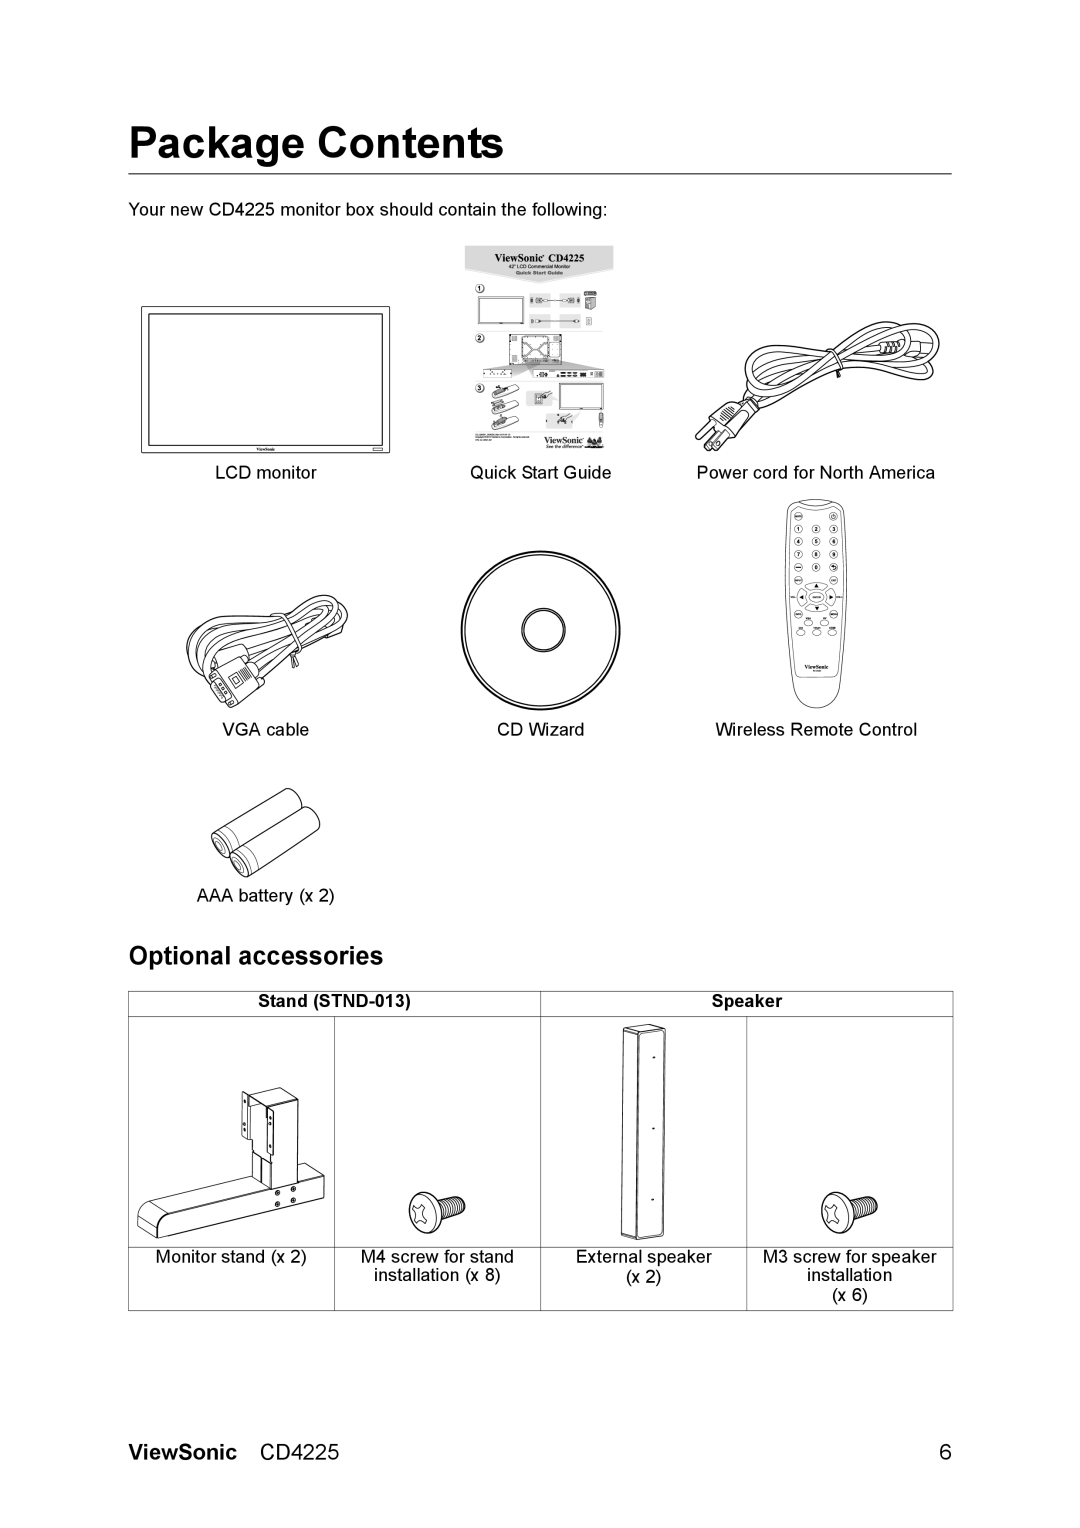 ViewSonic CD4225 manual Package Contents, Optional accessories 